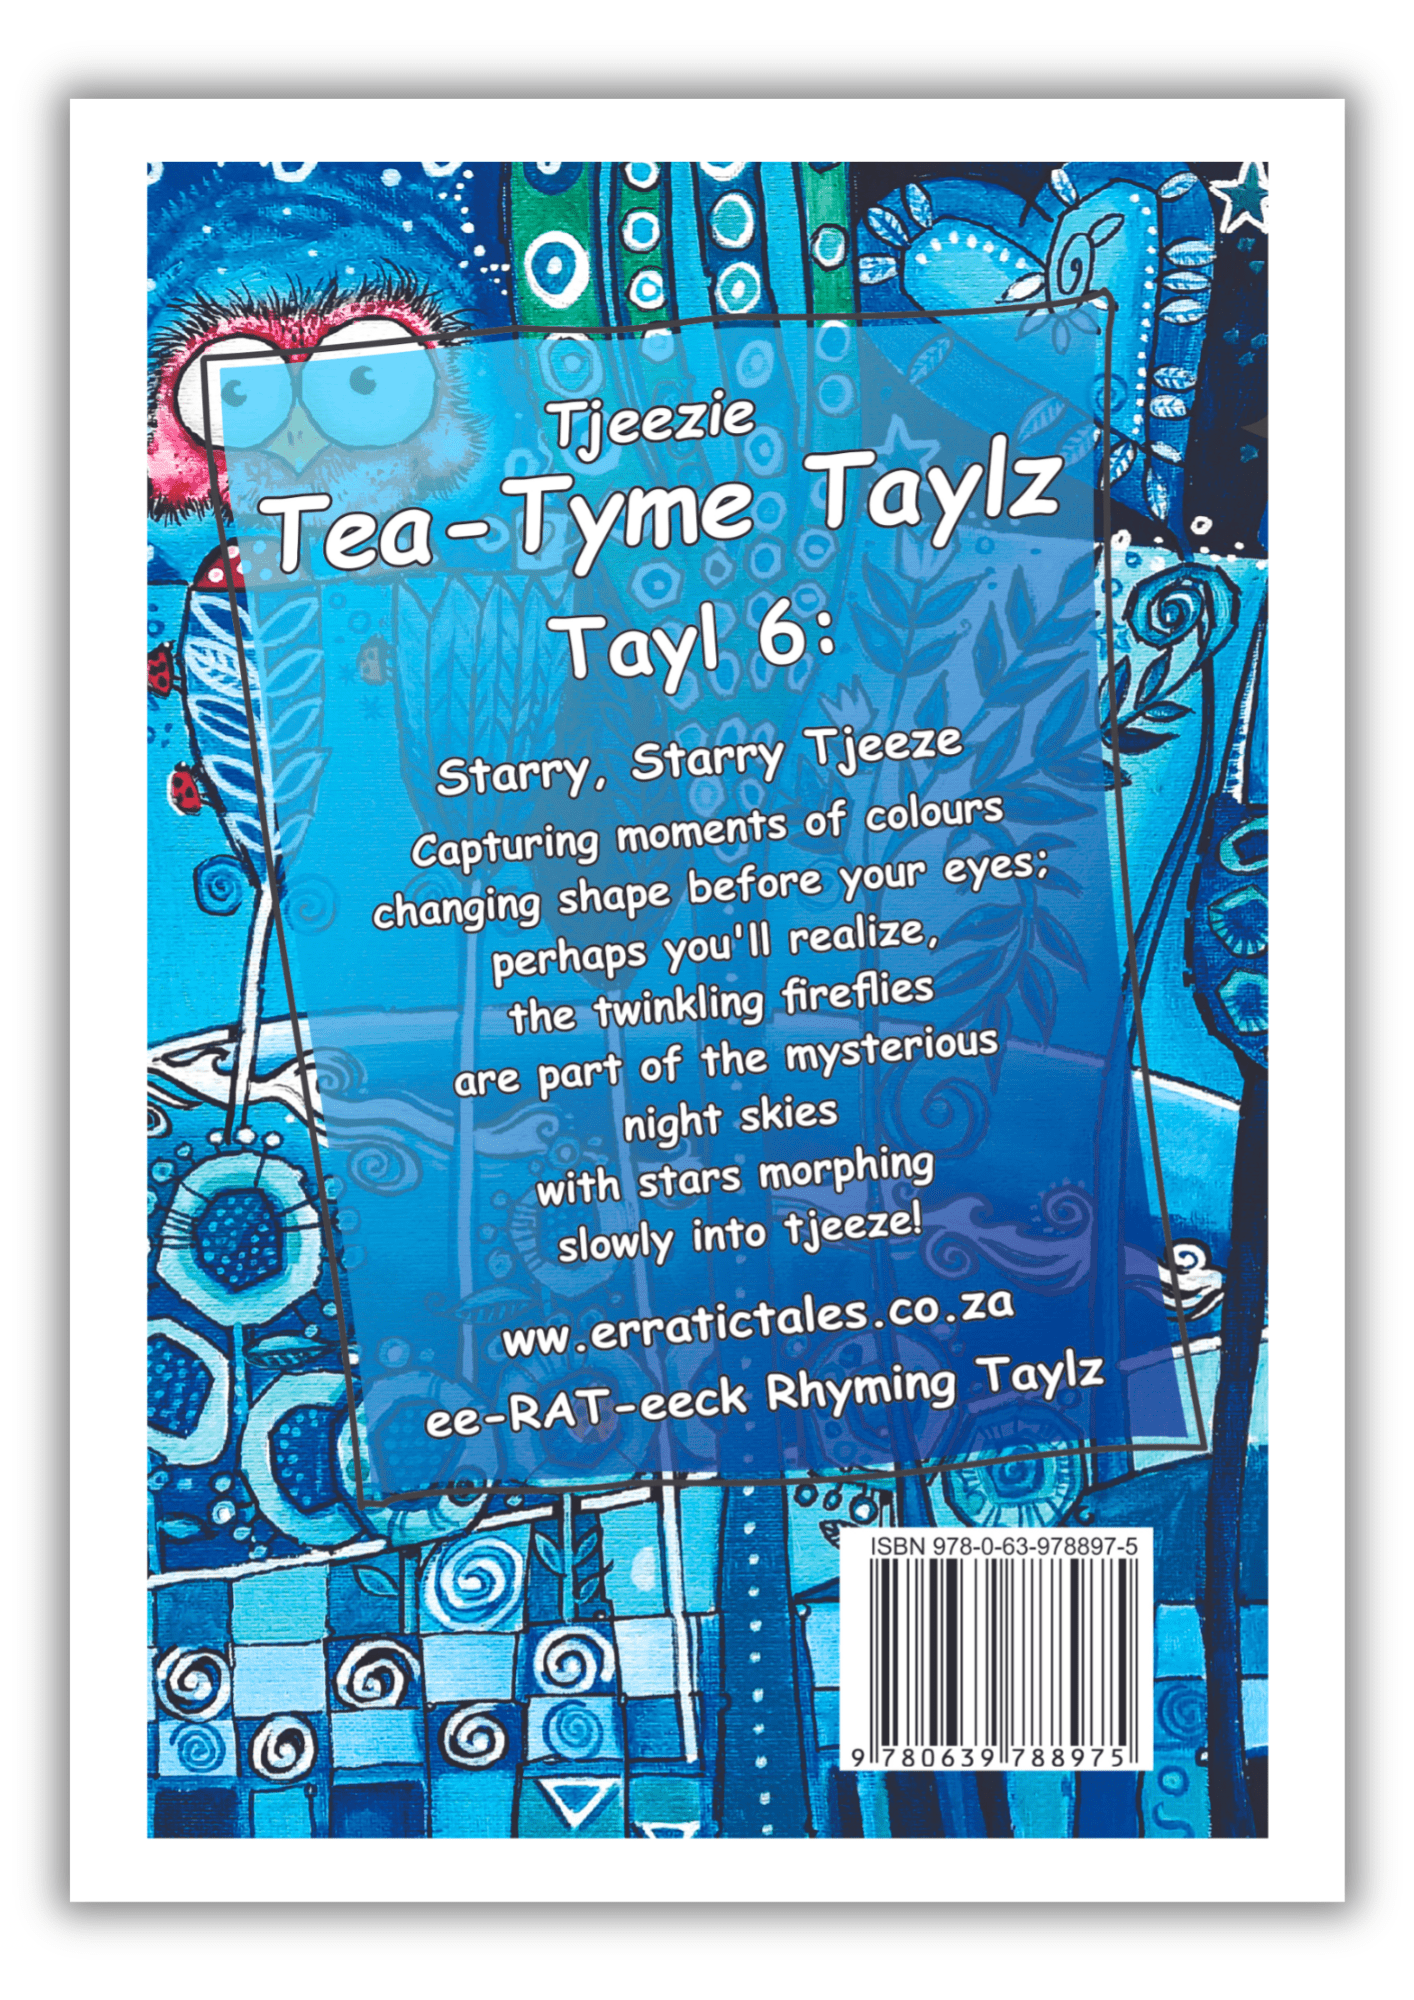 STARRY TJEEZE BACK COVER